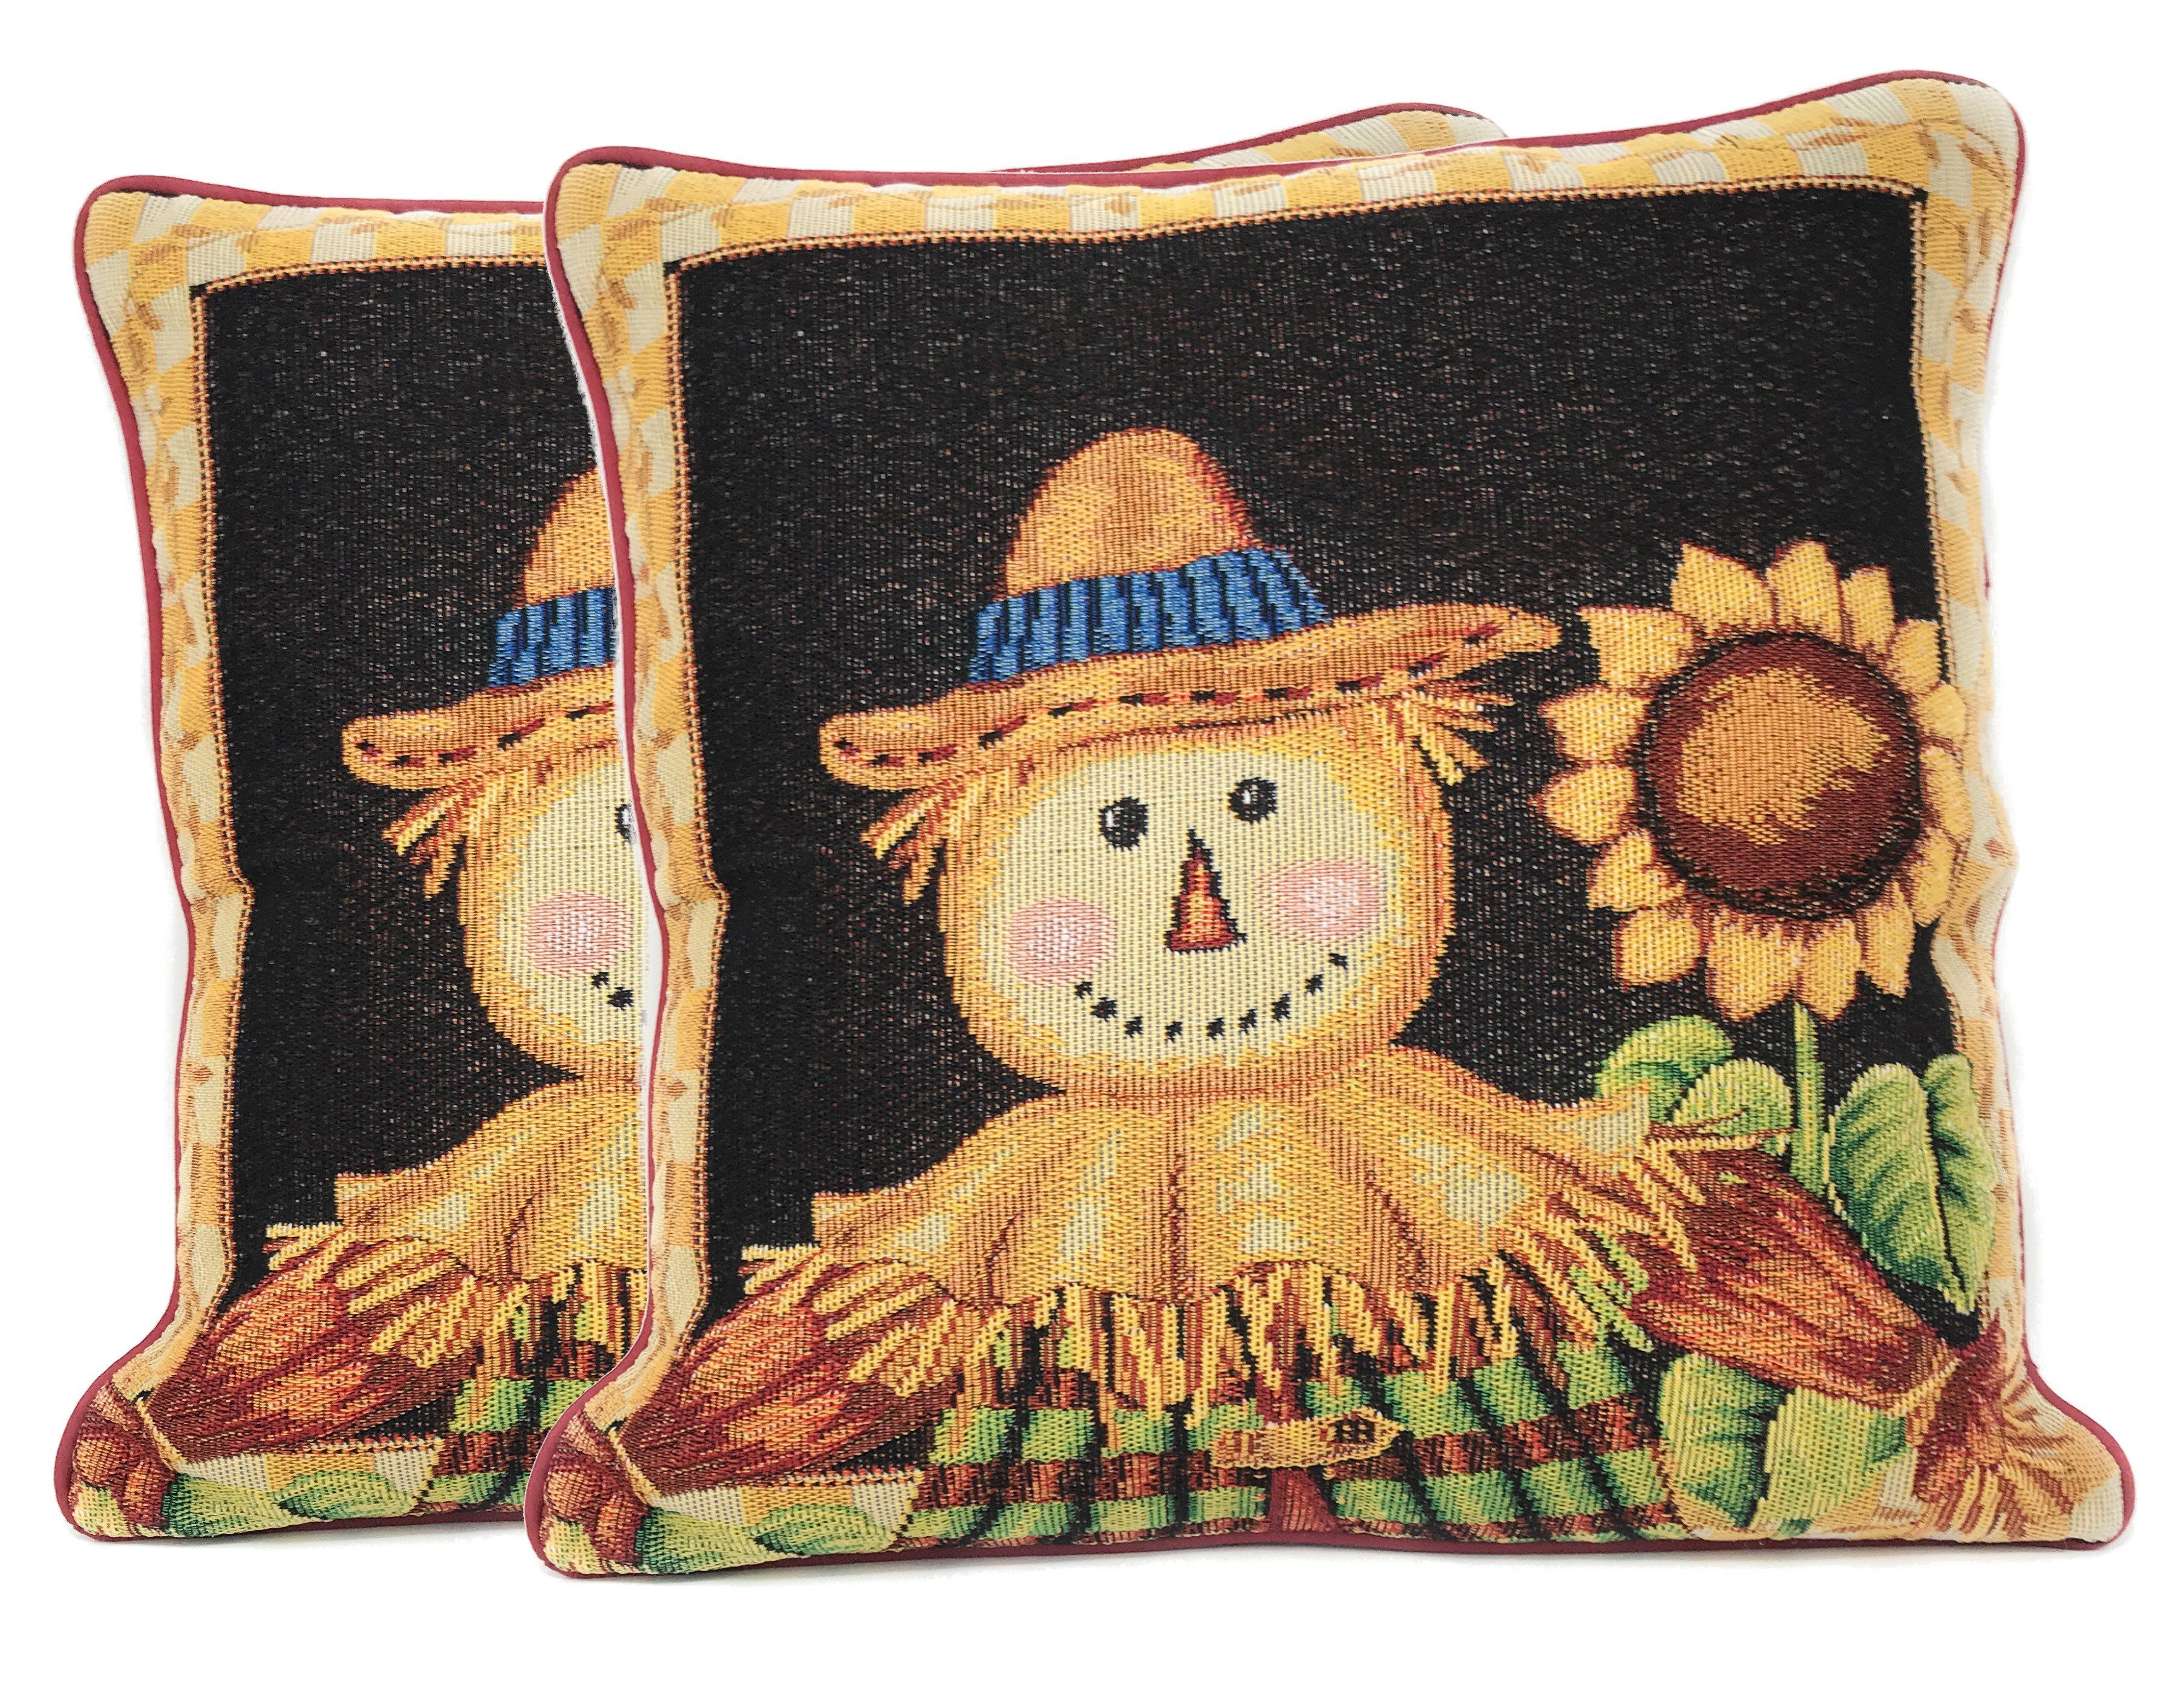 Tache Sunflower Field Scarecrow Autumn Harvest Woven Tapestry Throw Pillow Cover (11712CC) - Tache Home Fashion